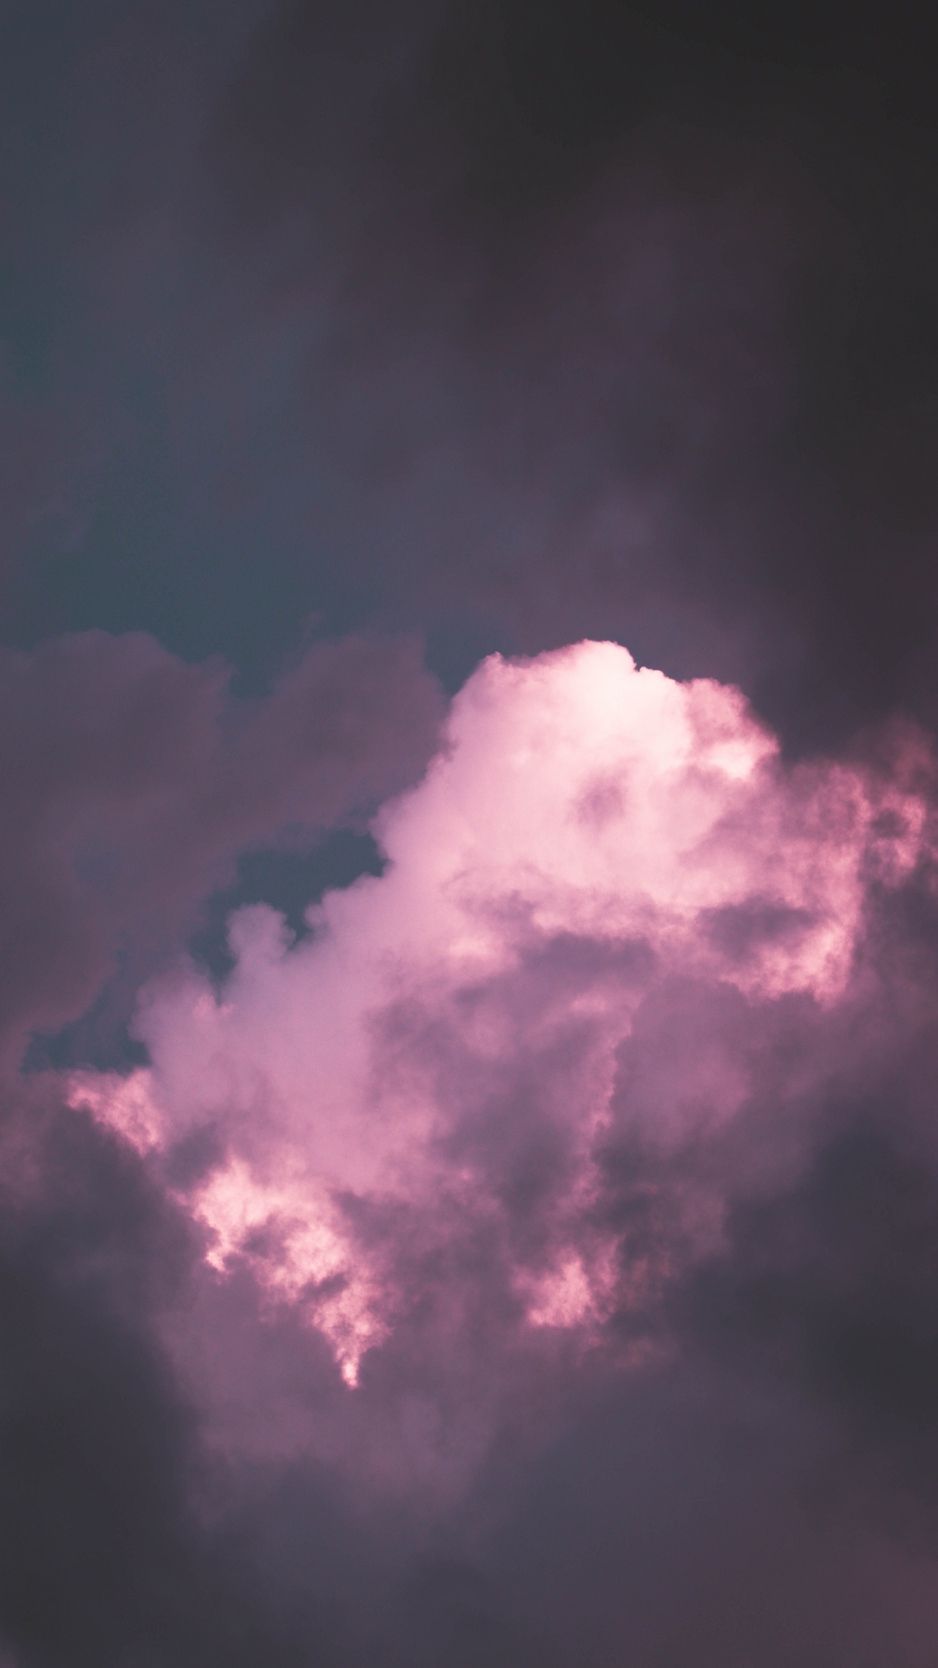 Download wallpaper 938x1668 clouds, sky, purple, shade, atmosphere